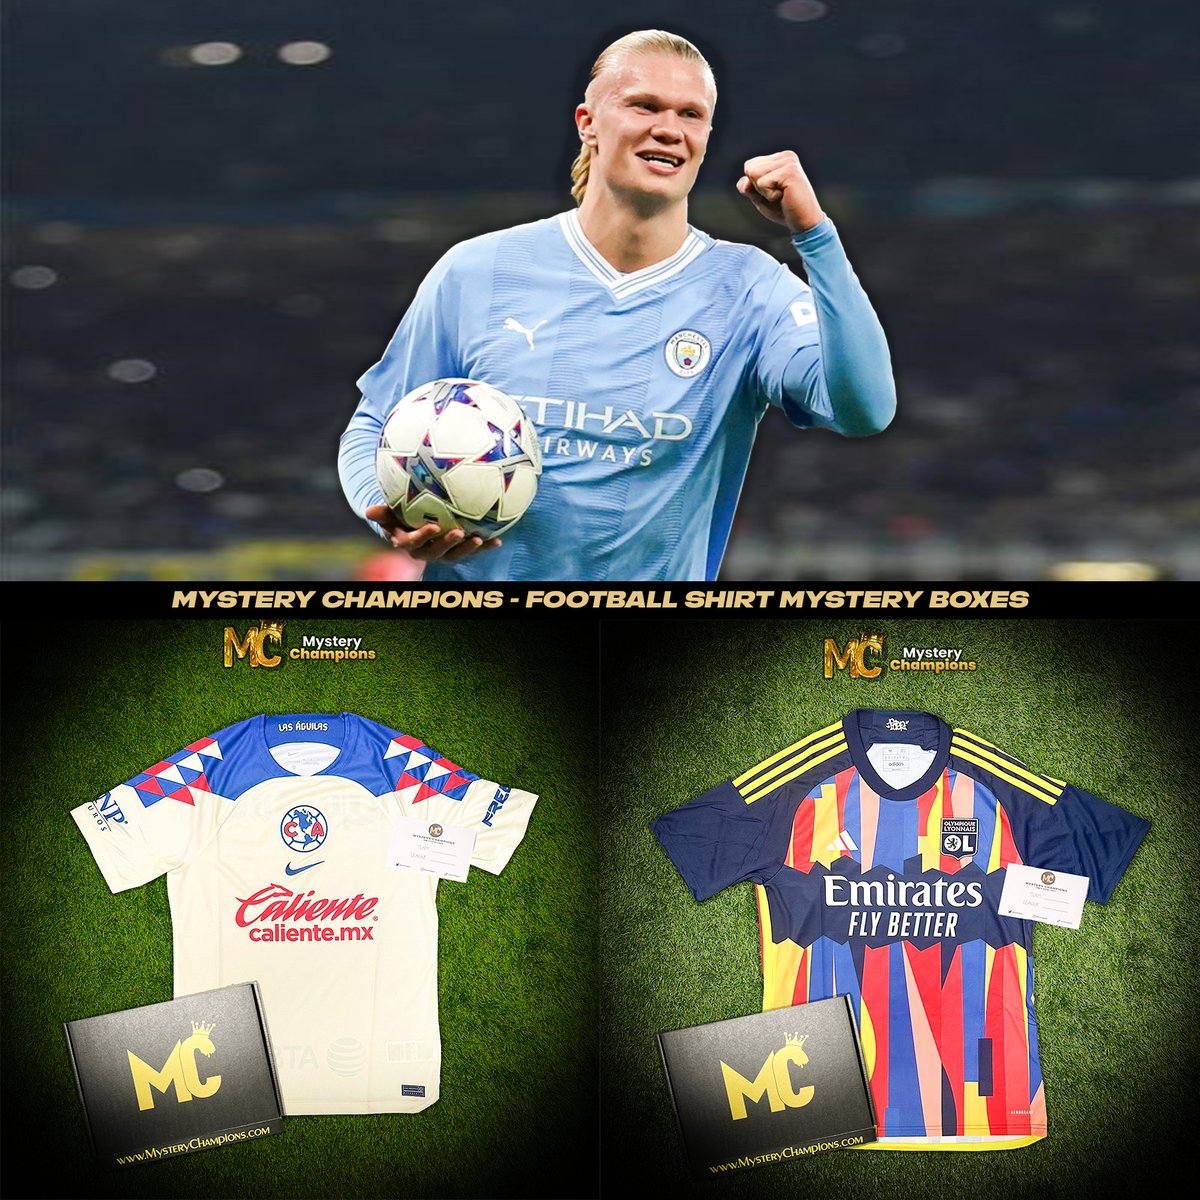 If Erling Haaland 🇳🇴 scores ANYTIME tonight we’ll giveaway a Mystery Football Shirt Box 📦

To enter simply 👇

🔄 Repost
🤝 Follow us @MysteryChampion

Good luck everyone! 🍀